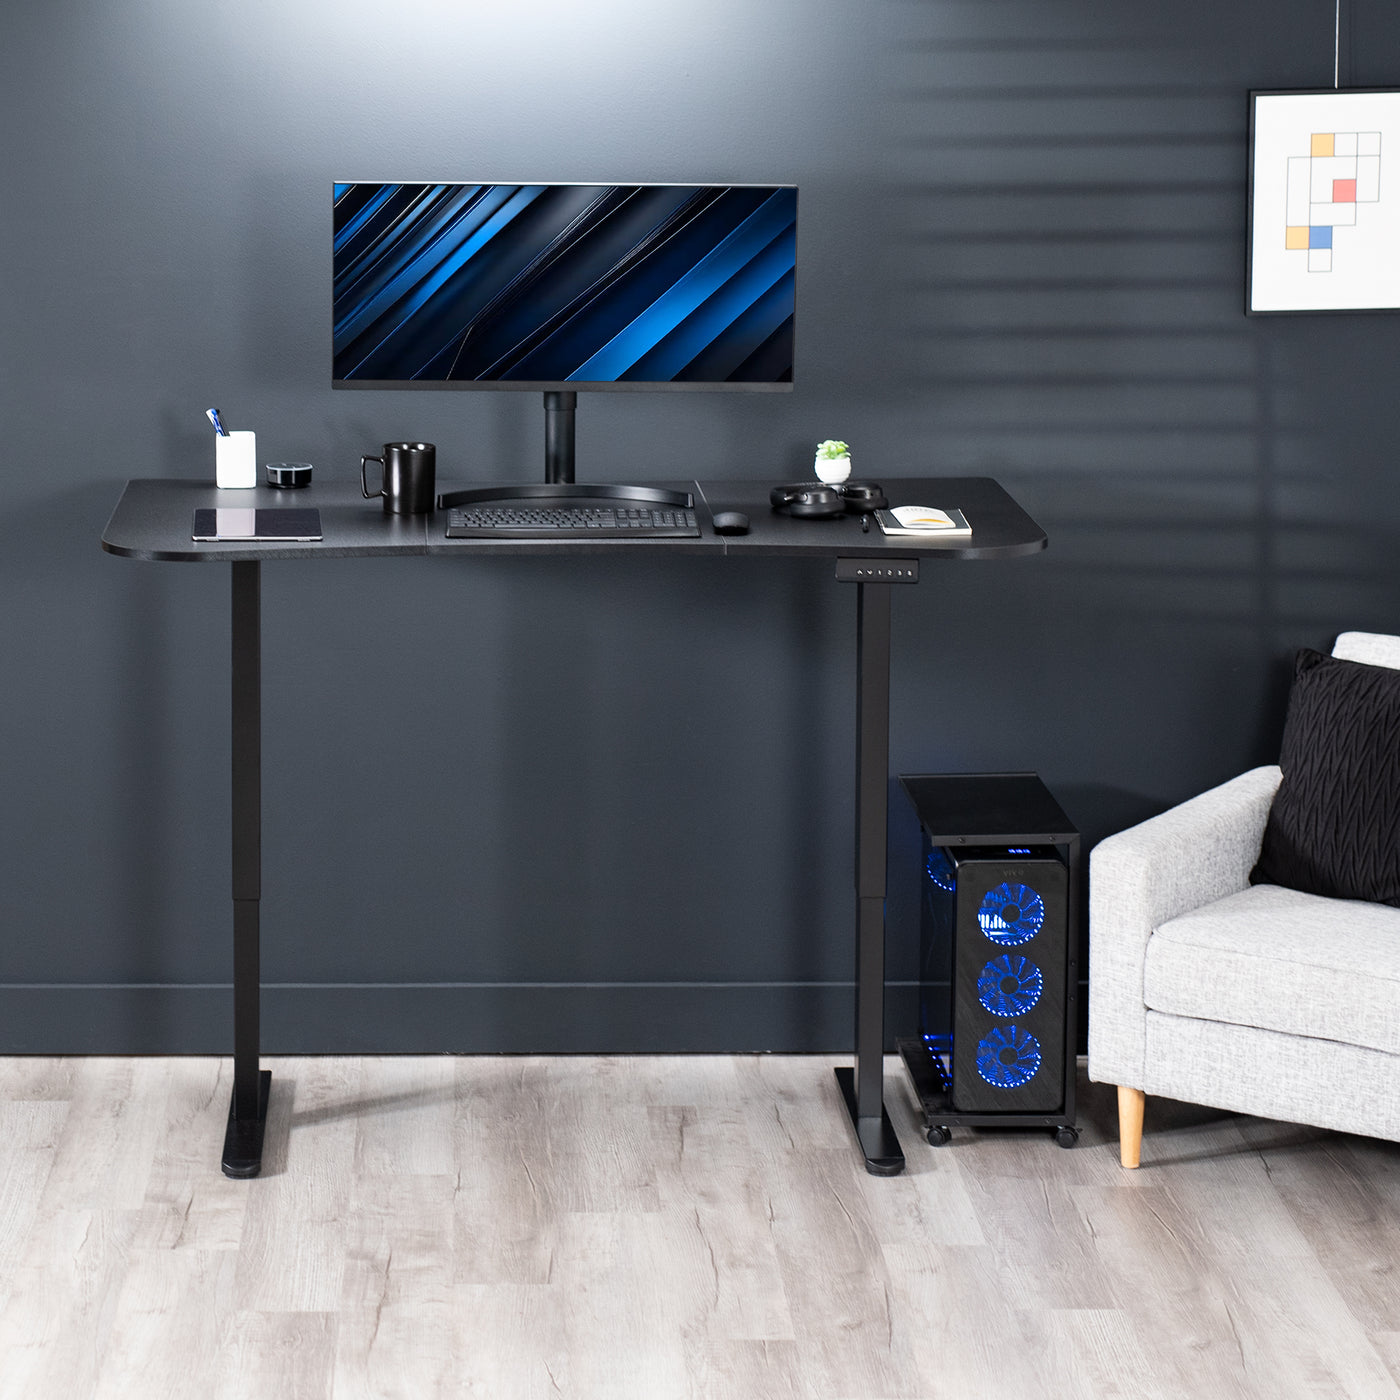 Height adjustable desk with side controller panel from VIVO.